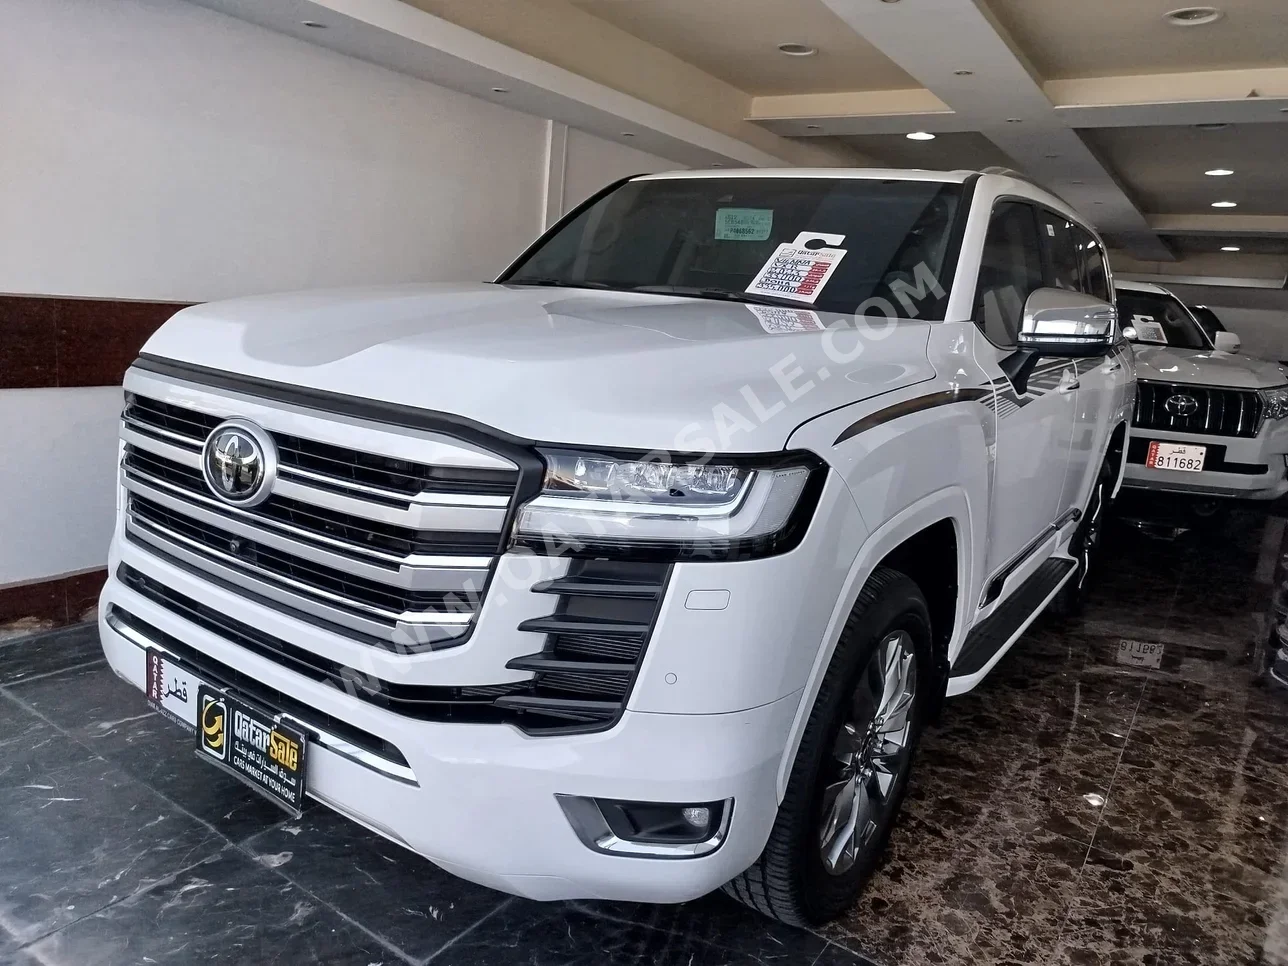 Toyota  Land Cruiser  VXR Twin Turbo  2023  Automatic  33,000 Km  6 Cylinder  Four Wheel Drive (4WD)  SUV  White  With Warranty